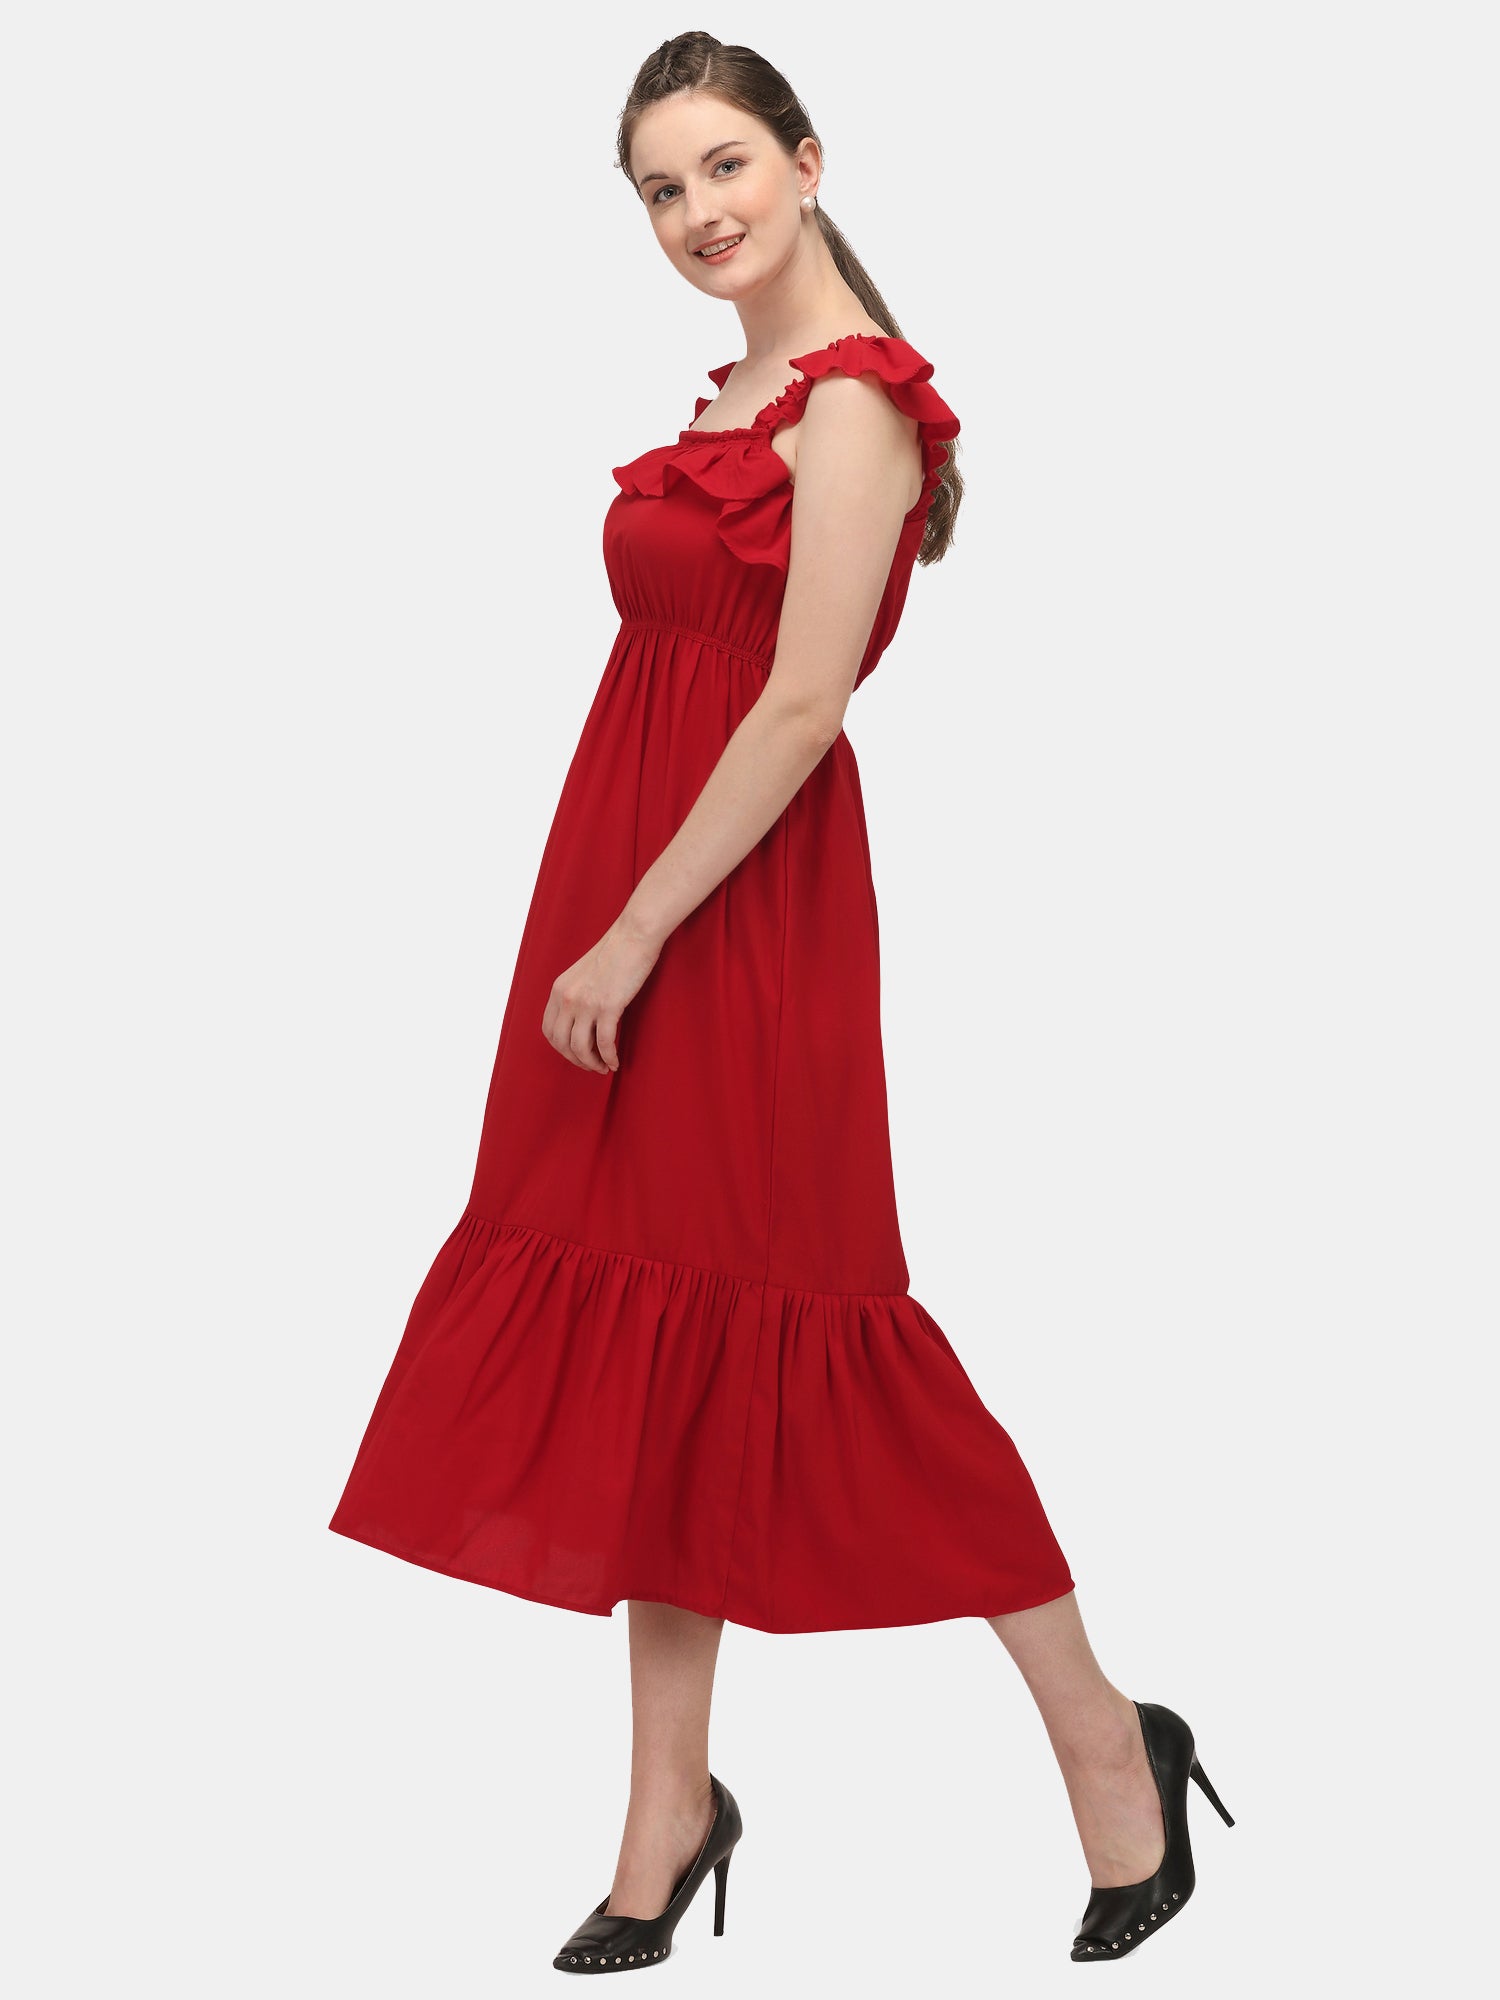 Women's Red Hot Long Ankle Length Dress - MESMORA FASHIONS